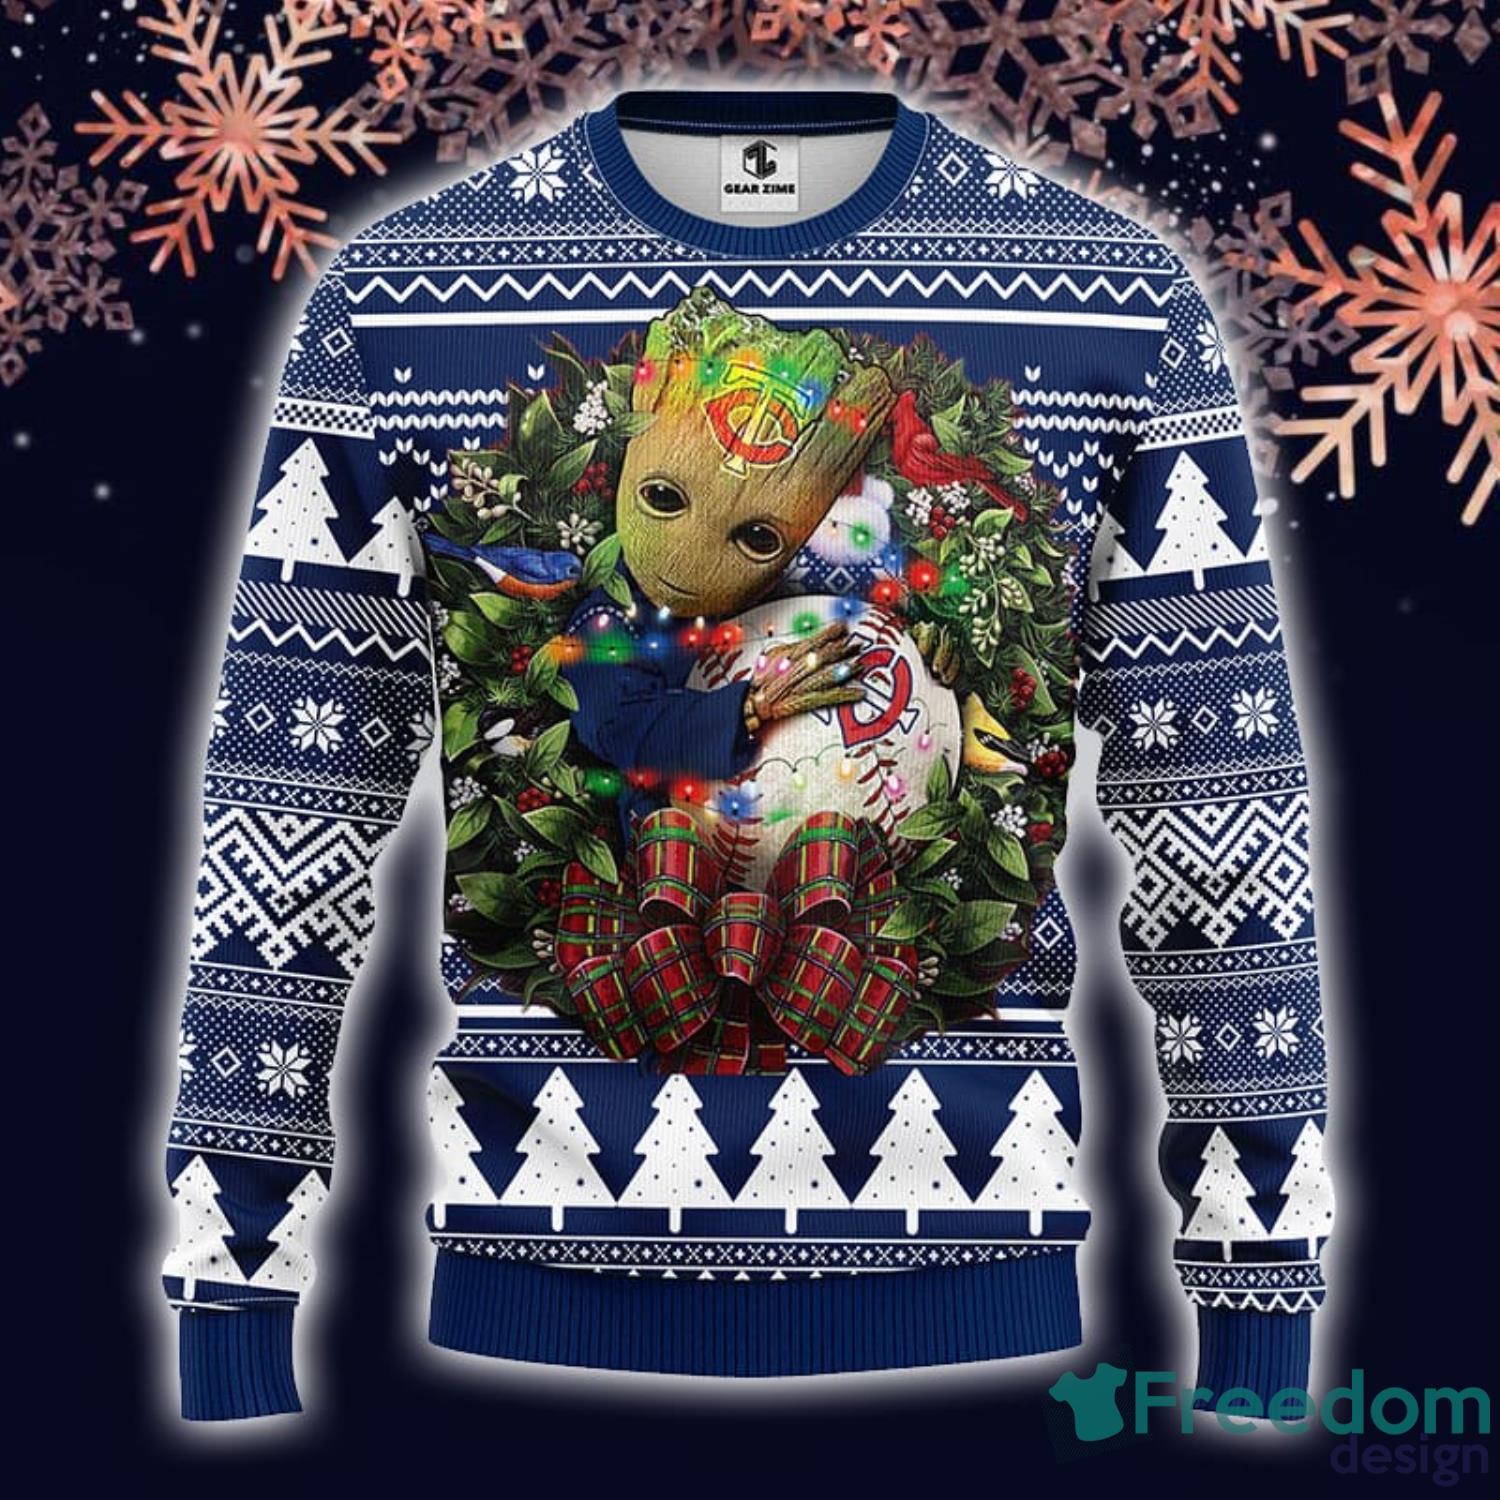 Minnesota Twins Christmas Sweater Surprising Baby Groot MN Twins Gift -  Personalized Gifts: Family, Sports, Occasions, Trending